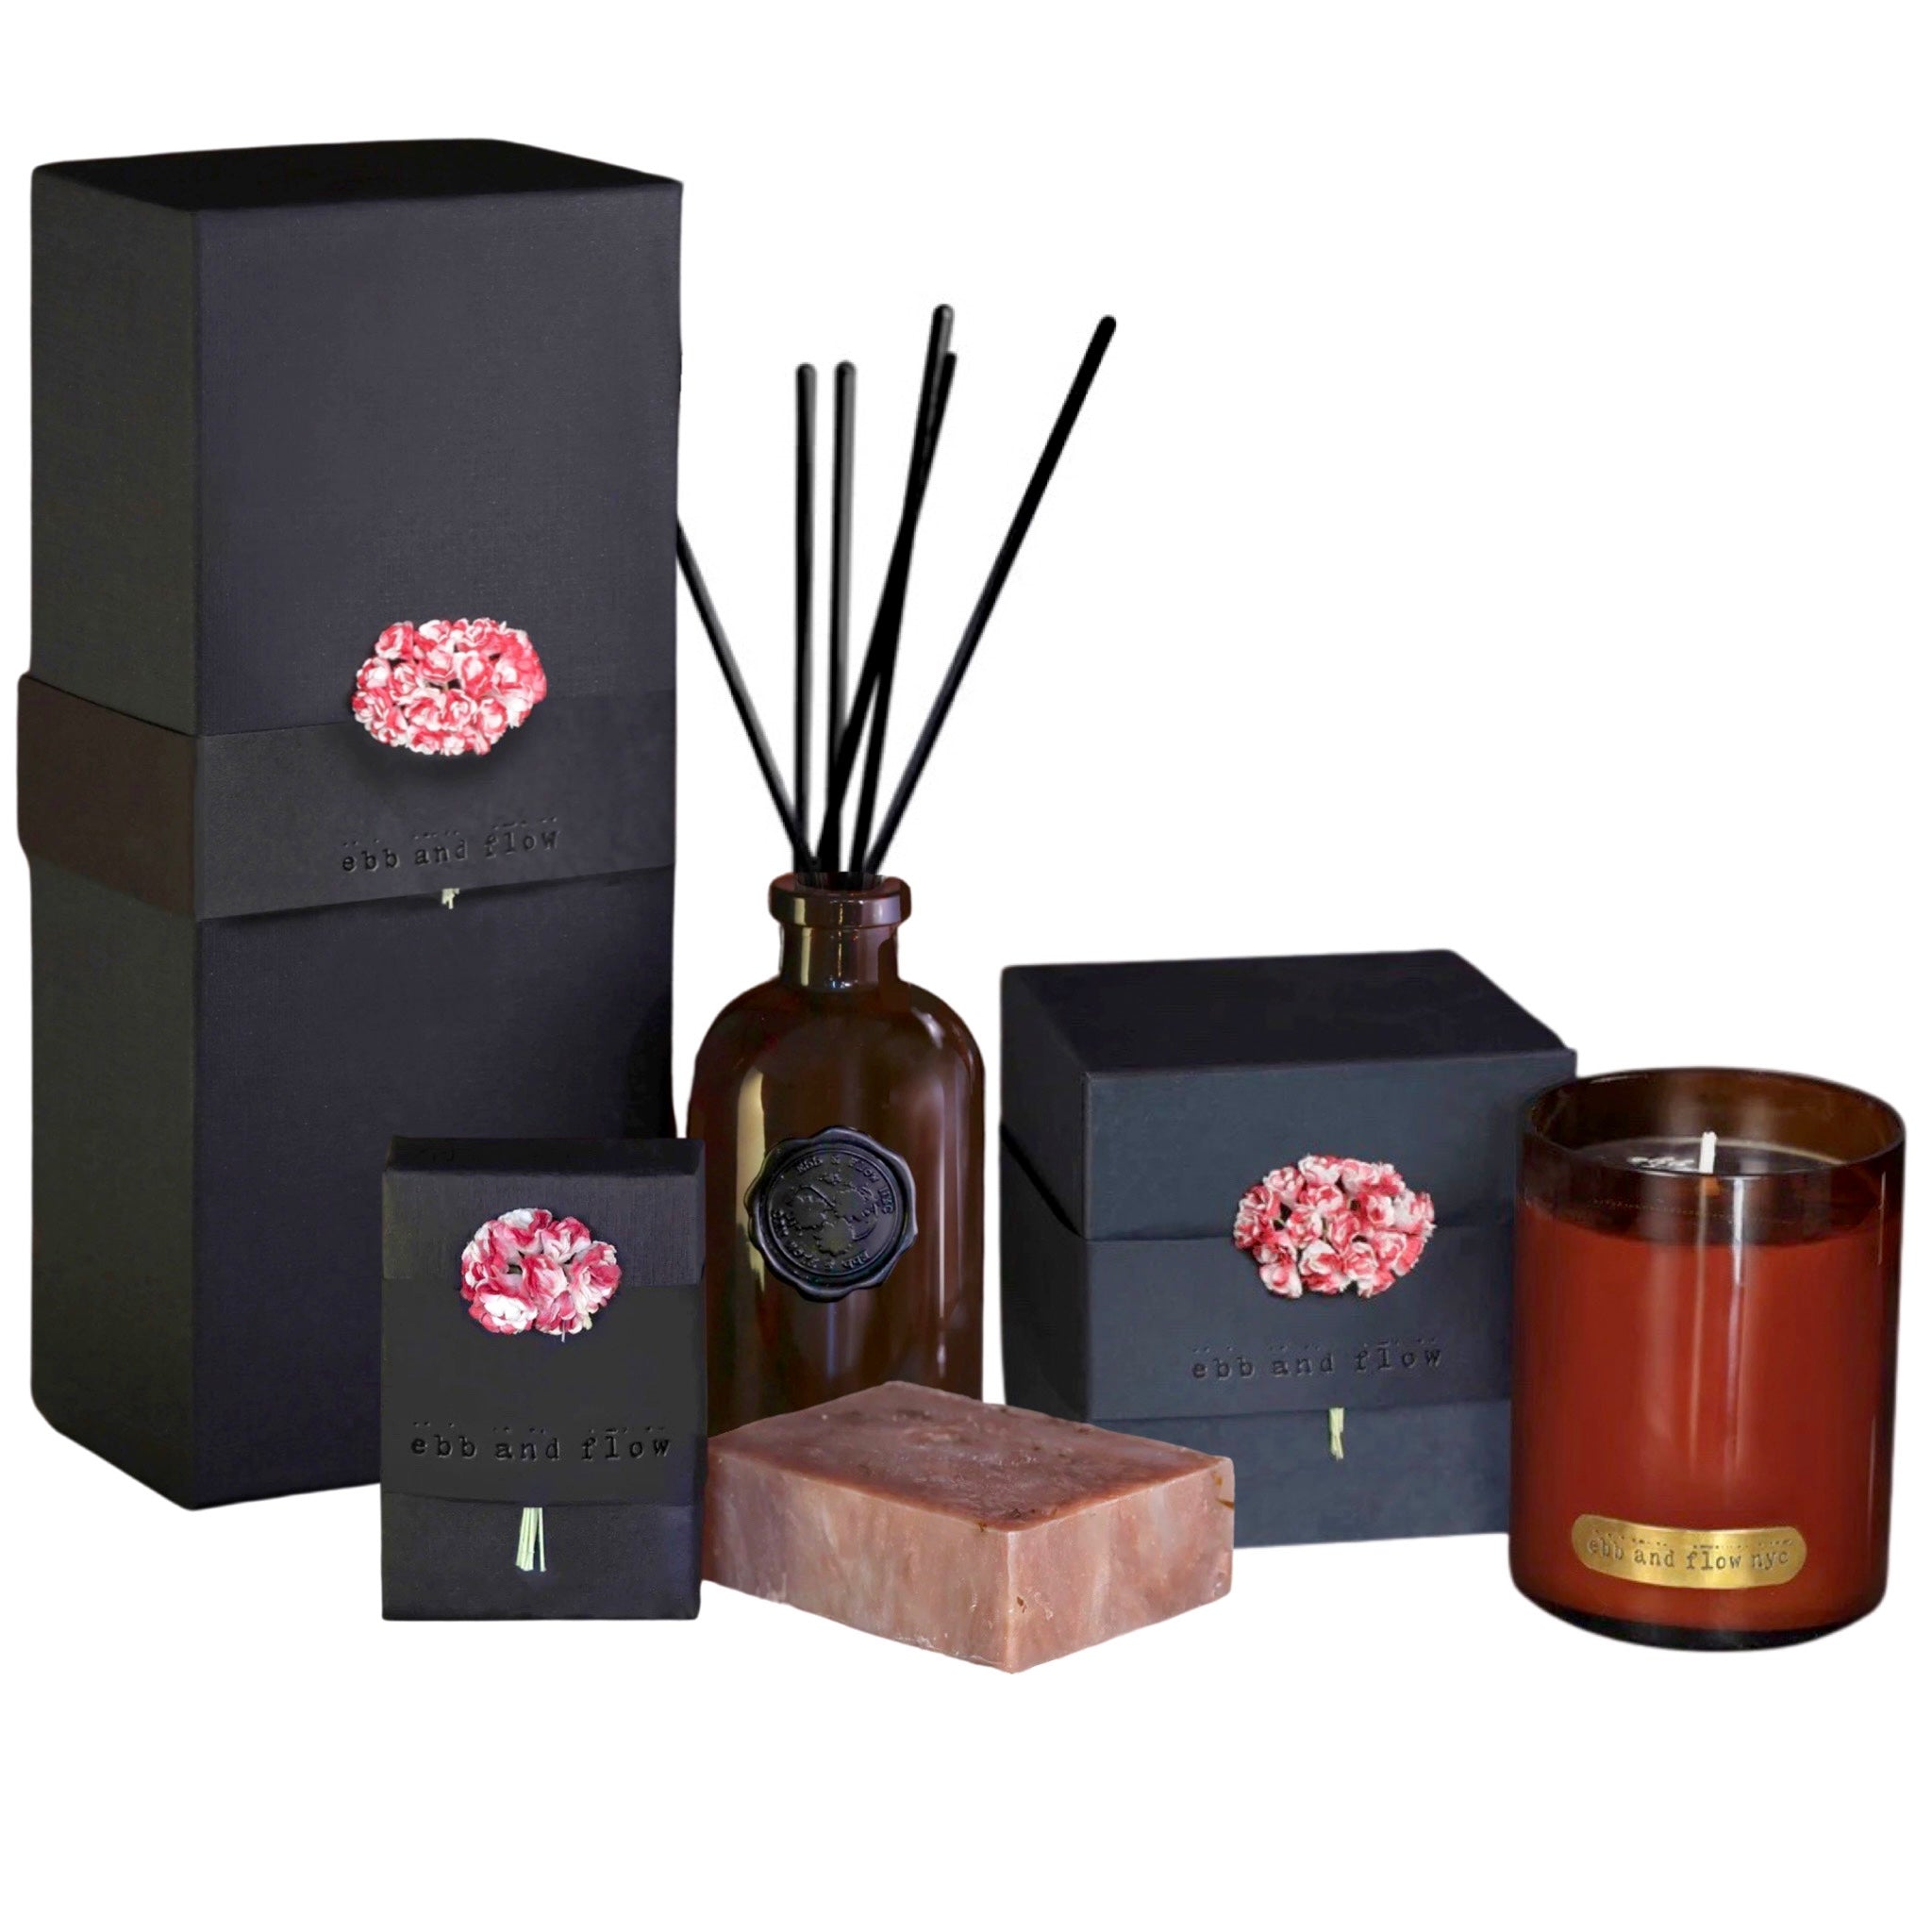 Ebb + Flow NYC Tobacco Black Cherry Fragrance Gift Set available at Shaylula Jewlery & Gifts in Tarrytown, NY and online. Gift Set includes a reed diffuser that will last up to 1 year, a soy candle in a mouth-blown glass with a 65 hour burn time and an olive oil based soap with plant-based essential oils. All are packaged in beautiful recycled material with hand-dyed paper flowers.  Hypoallergenic and vegan.